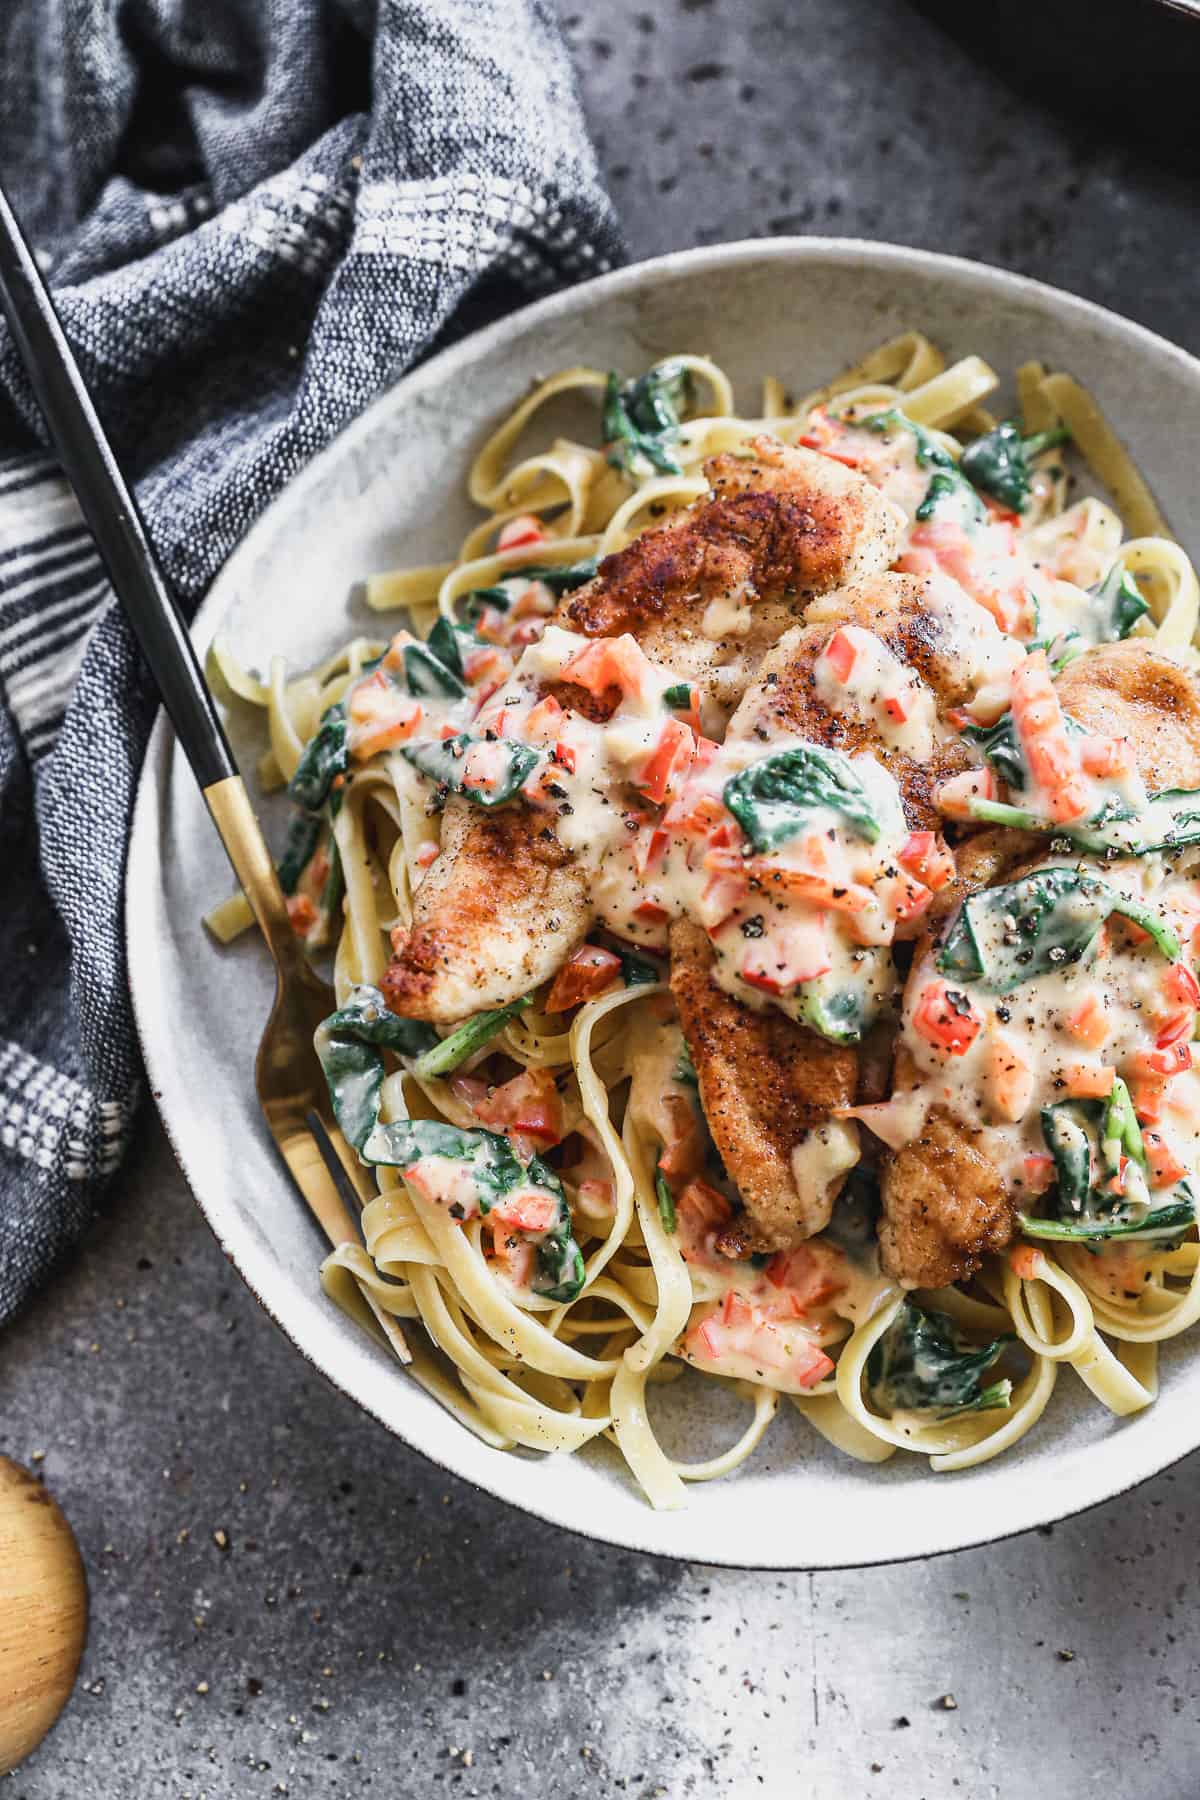 A close up image of an easy tuscan chicken pasta recipe with golden chicken tenders in a creamy sauce, ready to enjoy.